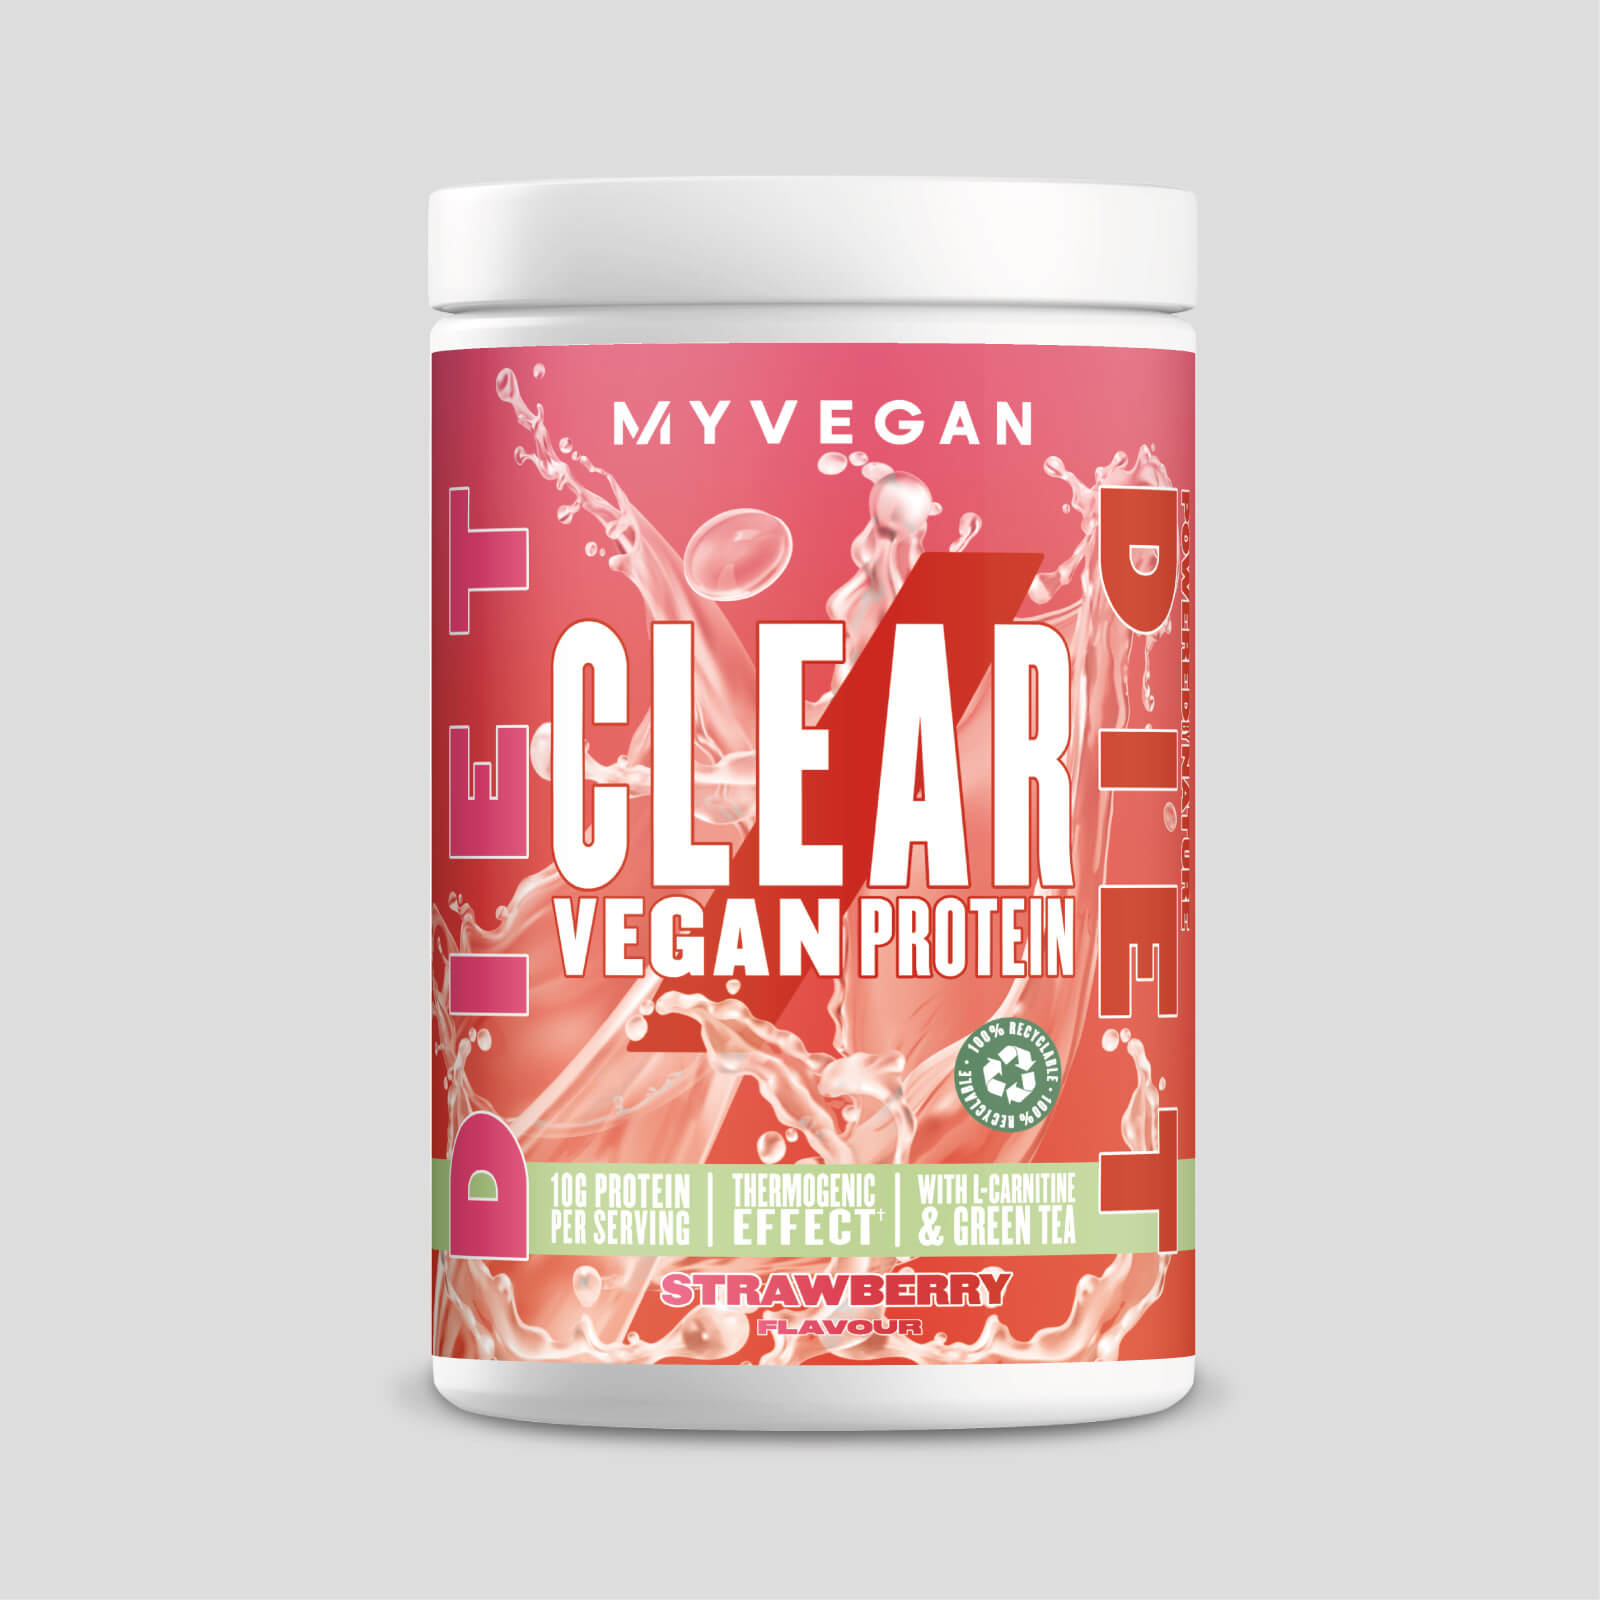 Clear Vegan Protein Diet - 20servings - Strawberry